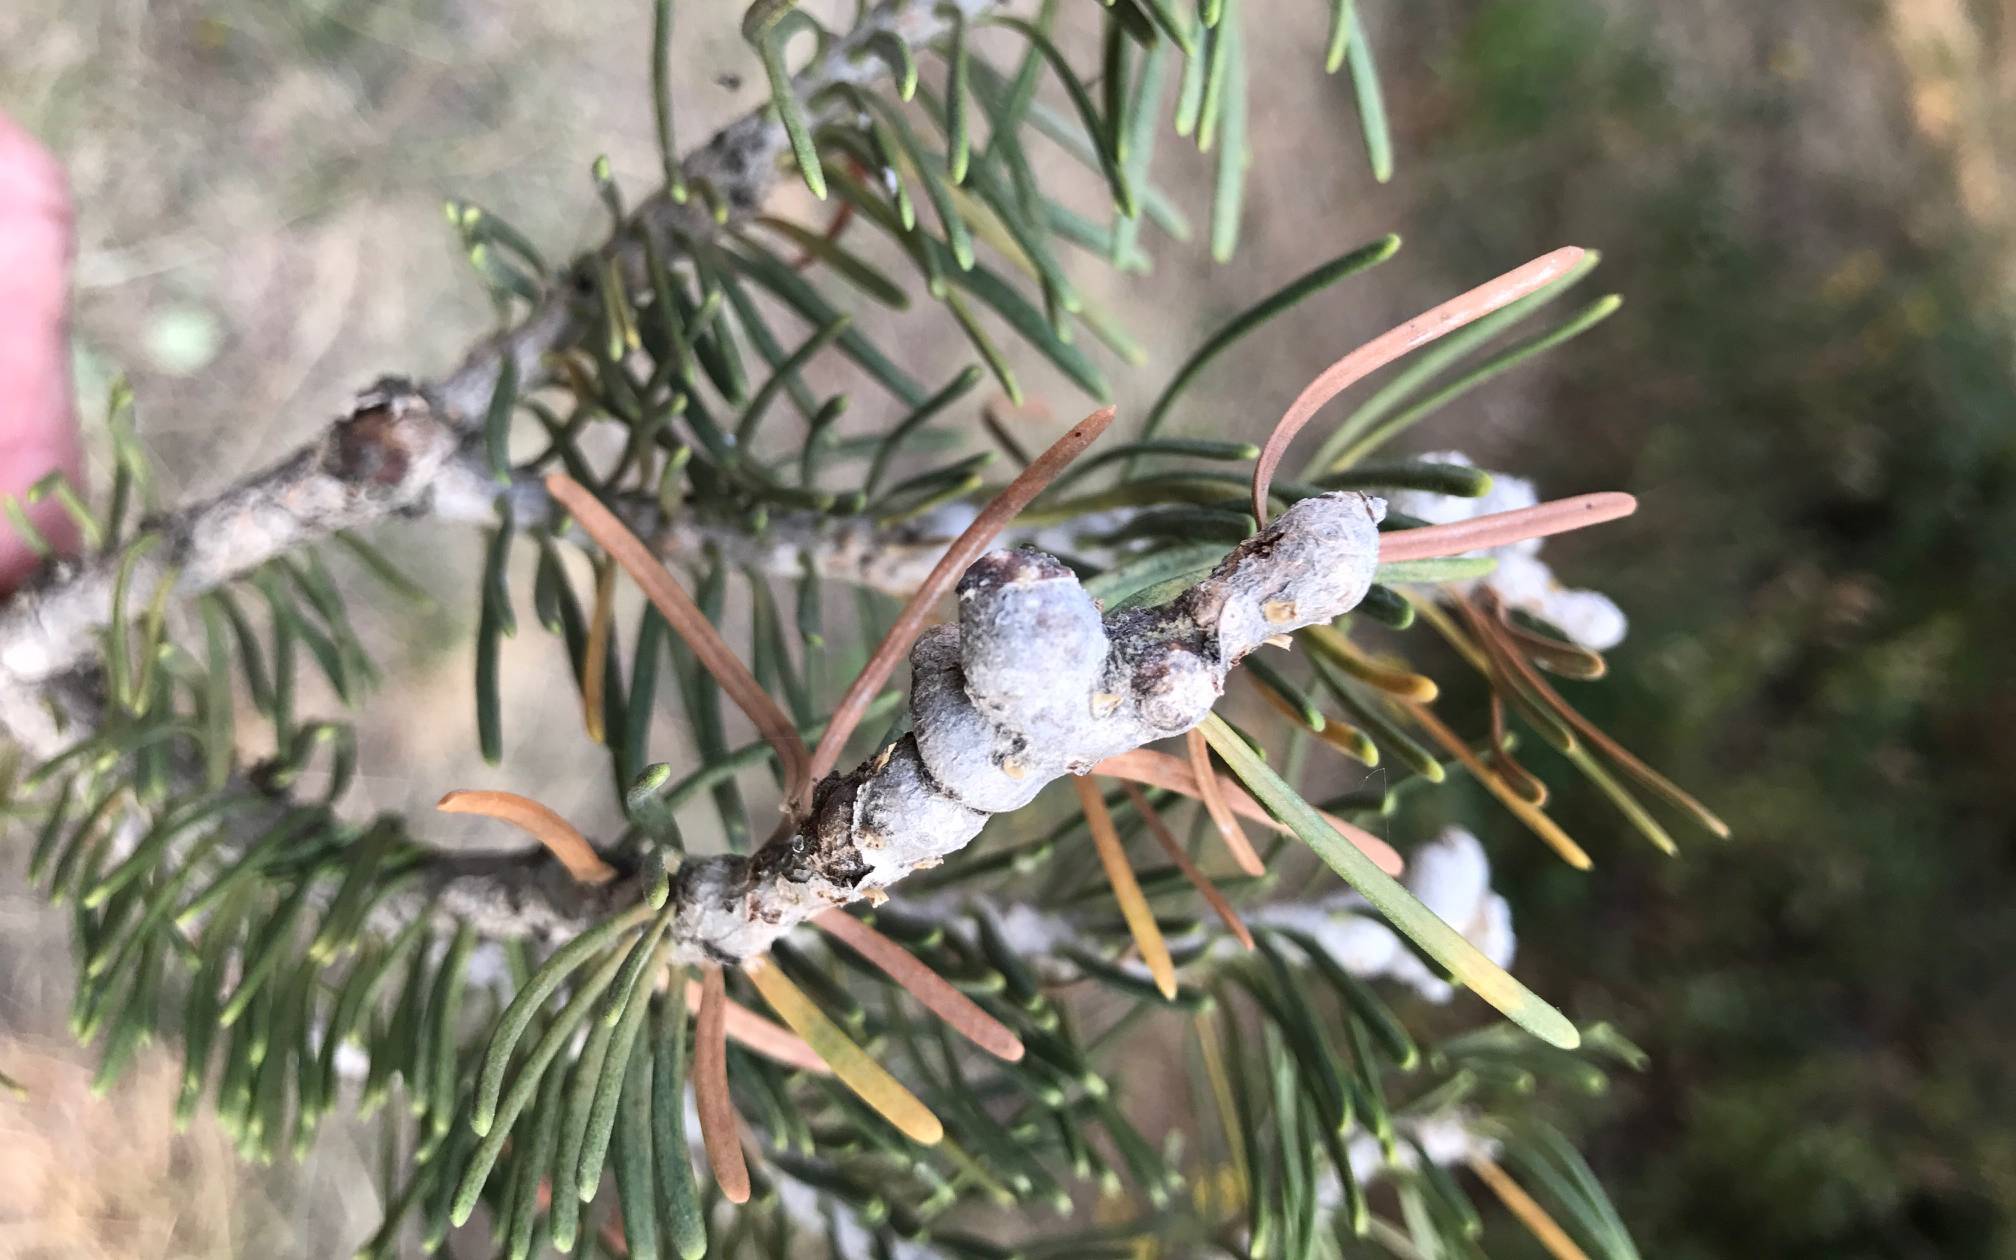 Abnormal Swelling, or Gouting, of Fir Branches from Balsam Woolly Adelgid Feeding Injury